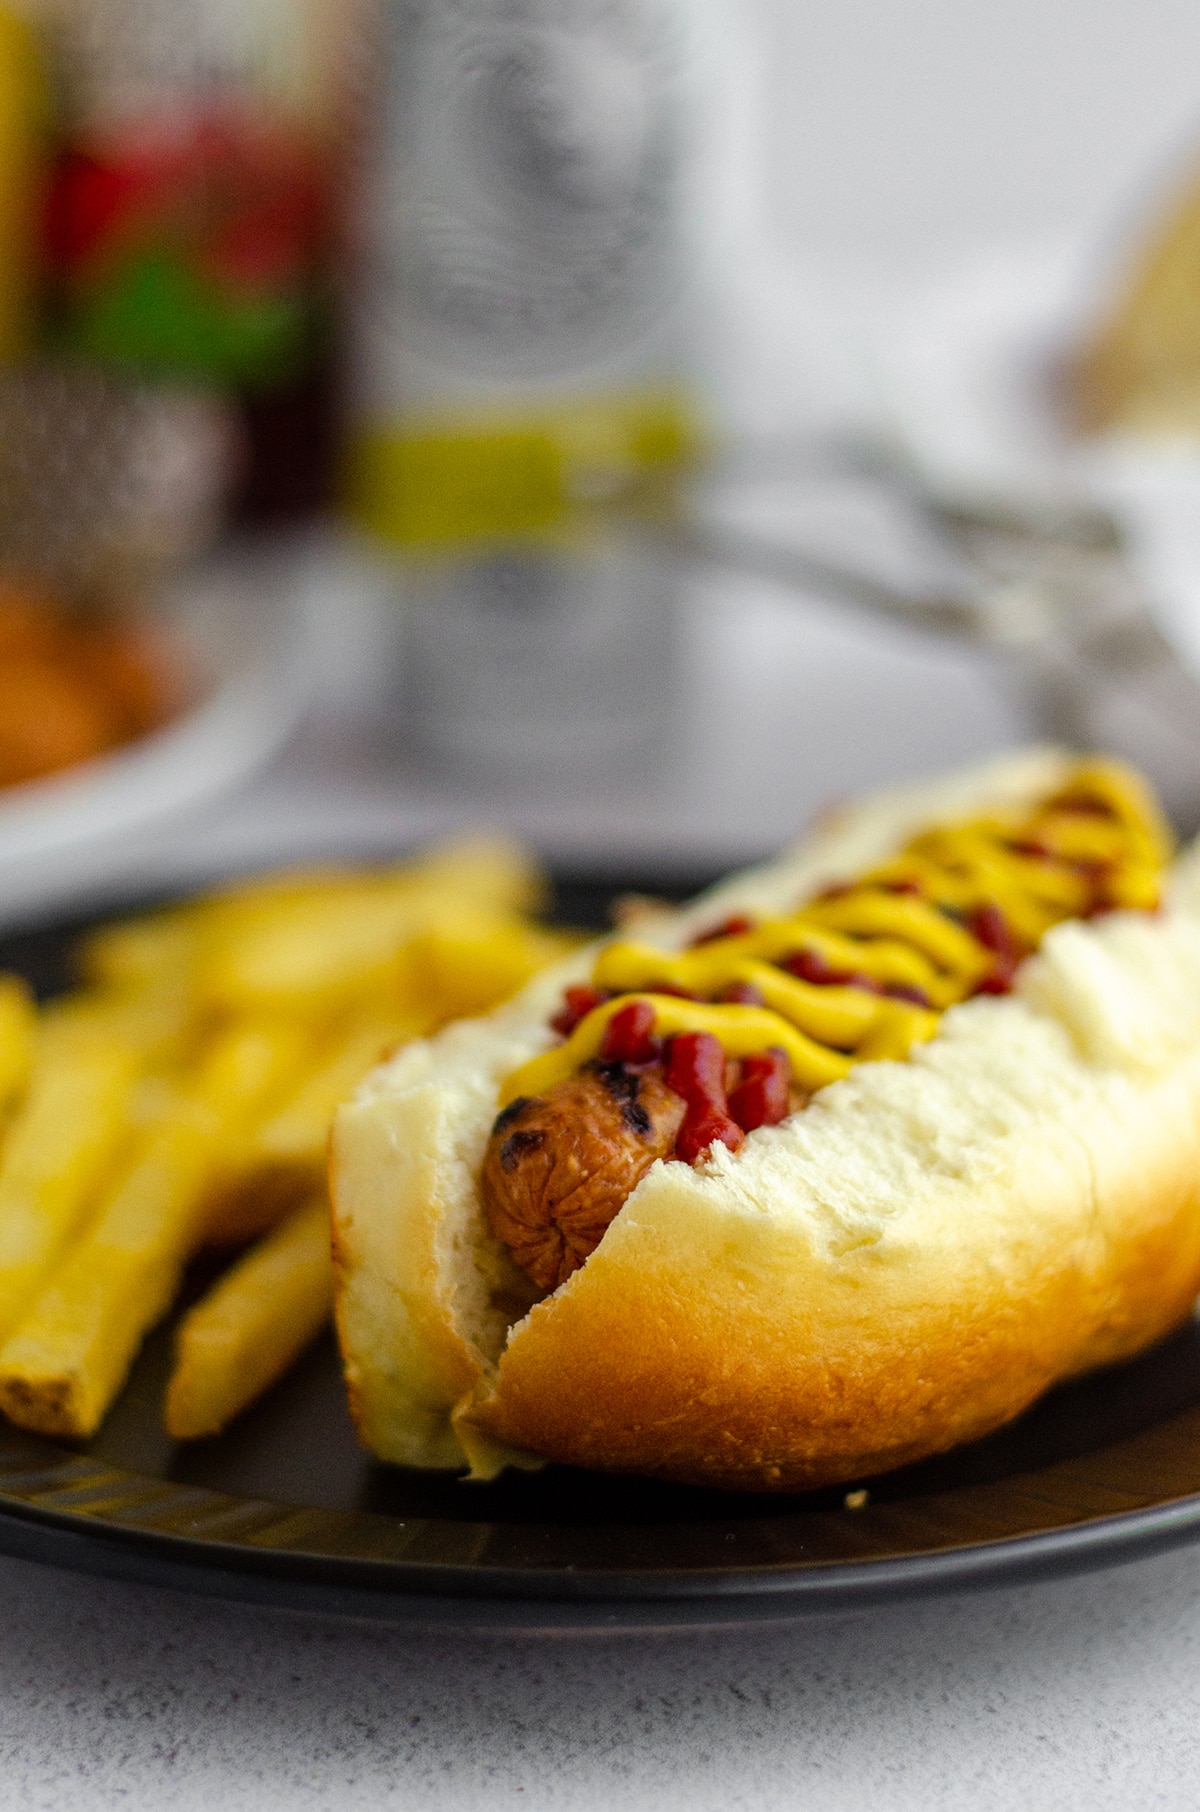 hot dog in a homemade hot dog bun with a squirts of ketchup and mustard sitting on a black plate with french fries